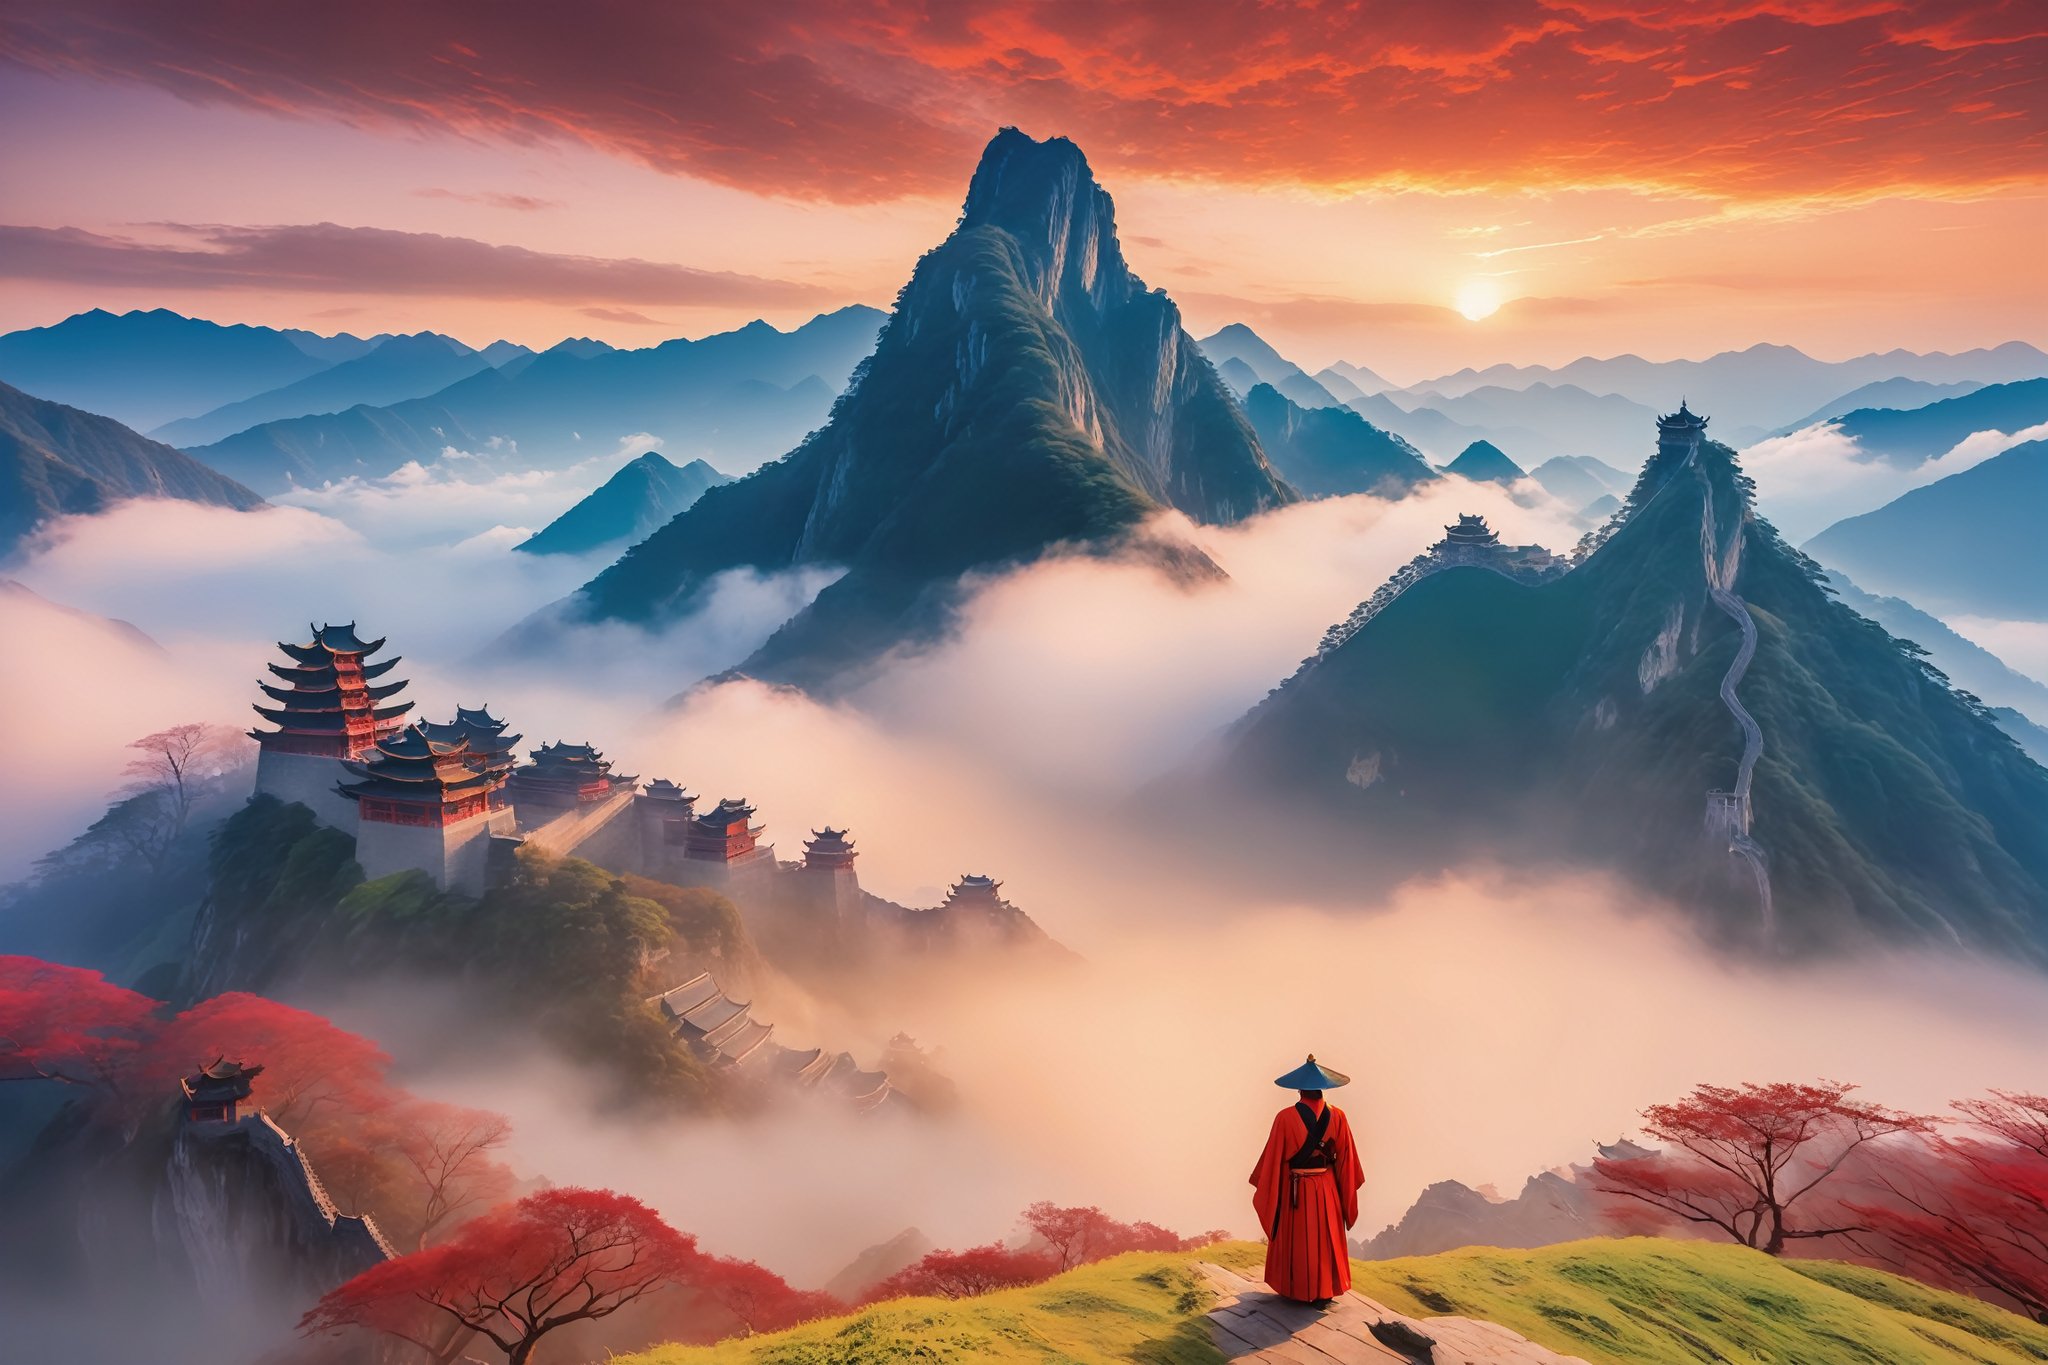 Against a backdrop of swirling mist and cloud-enshrouded peaks, a majestic dragon's back rises from the rugged terrain of Longmen Mountain, its scales glistening with an otherworldly sheen. In the foreground, a lone figure stands at the mountain's foot, their determined gaze fixed on the mythical beast above. Vibrant hues of crimson and gold dance across the scene, evoking a sense of ancient mysticism.